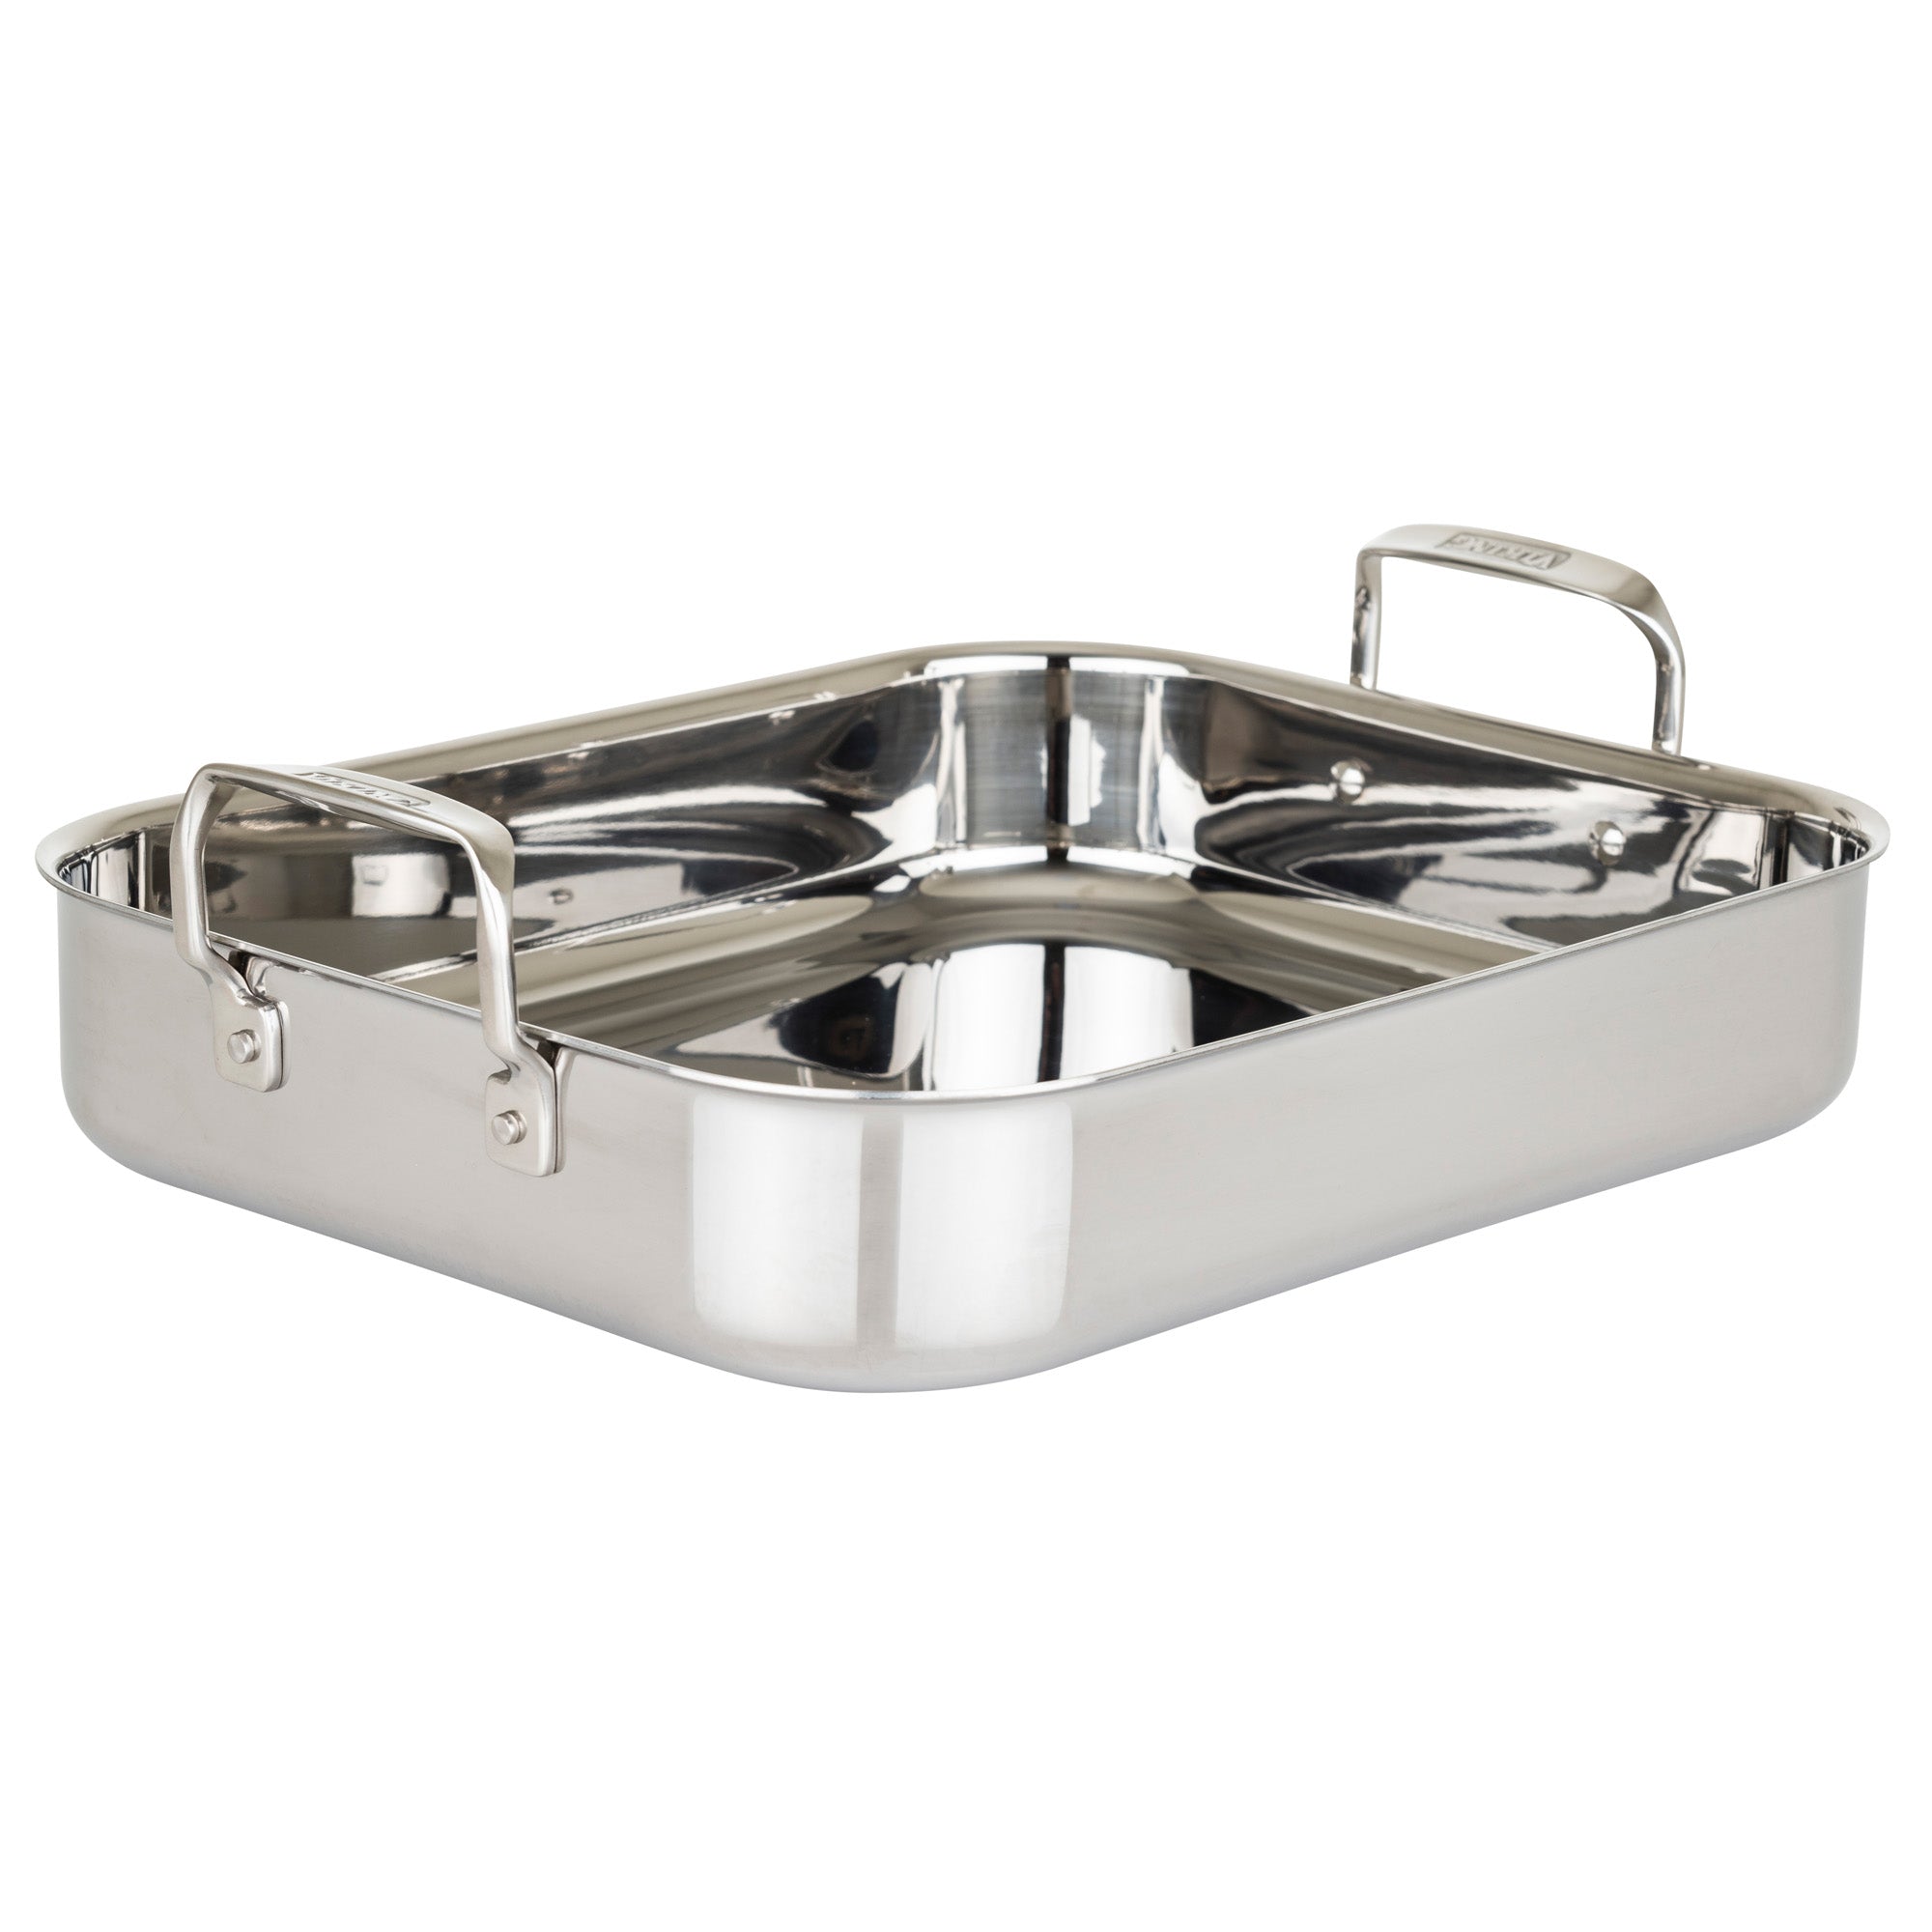 D3 Stainless 3-Ply Bonded Cookware Large Flared Roaster with Rack and Two Turkey Forks